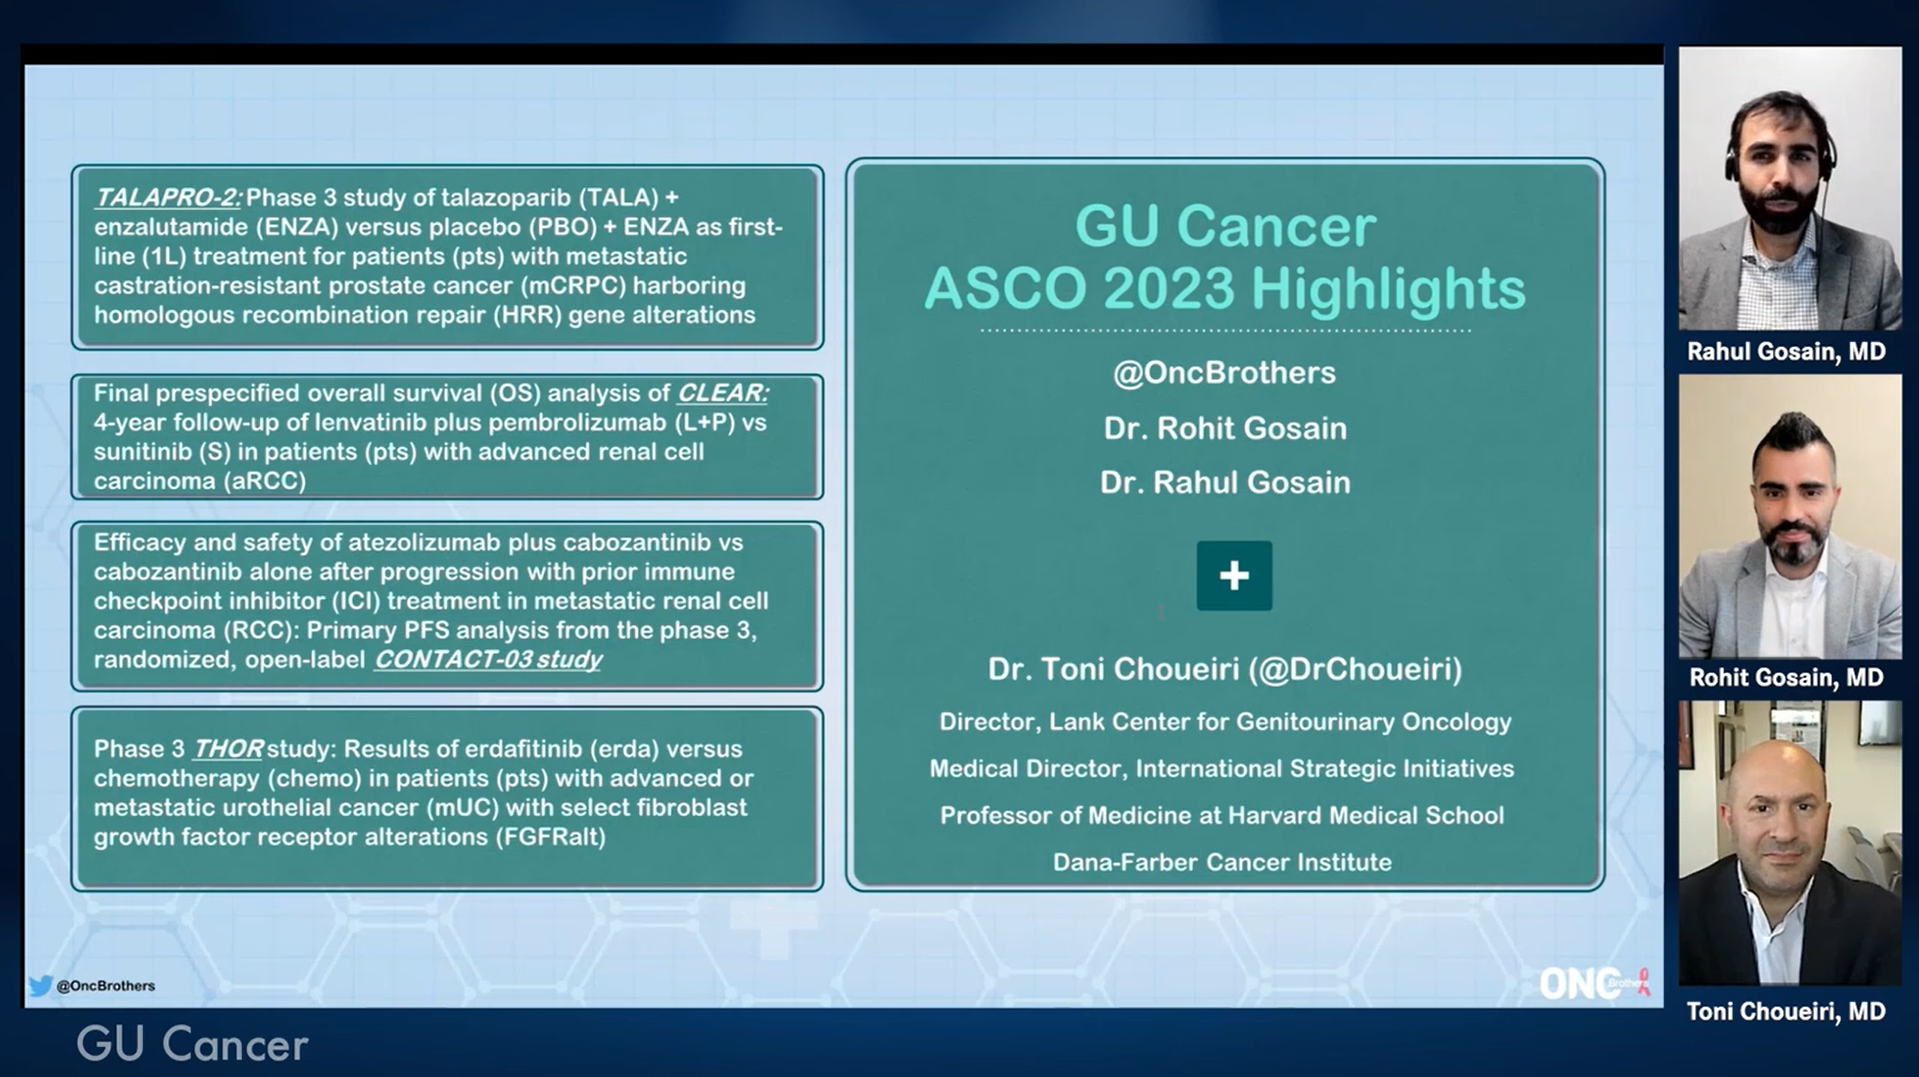 Experts on genitourinary cancers